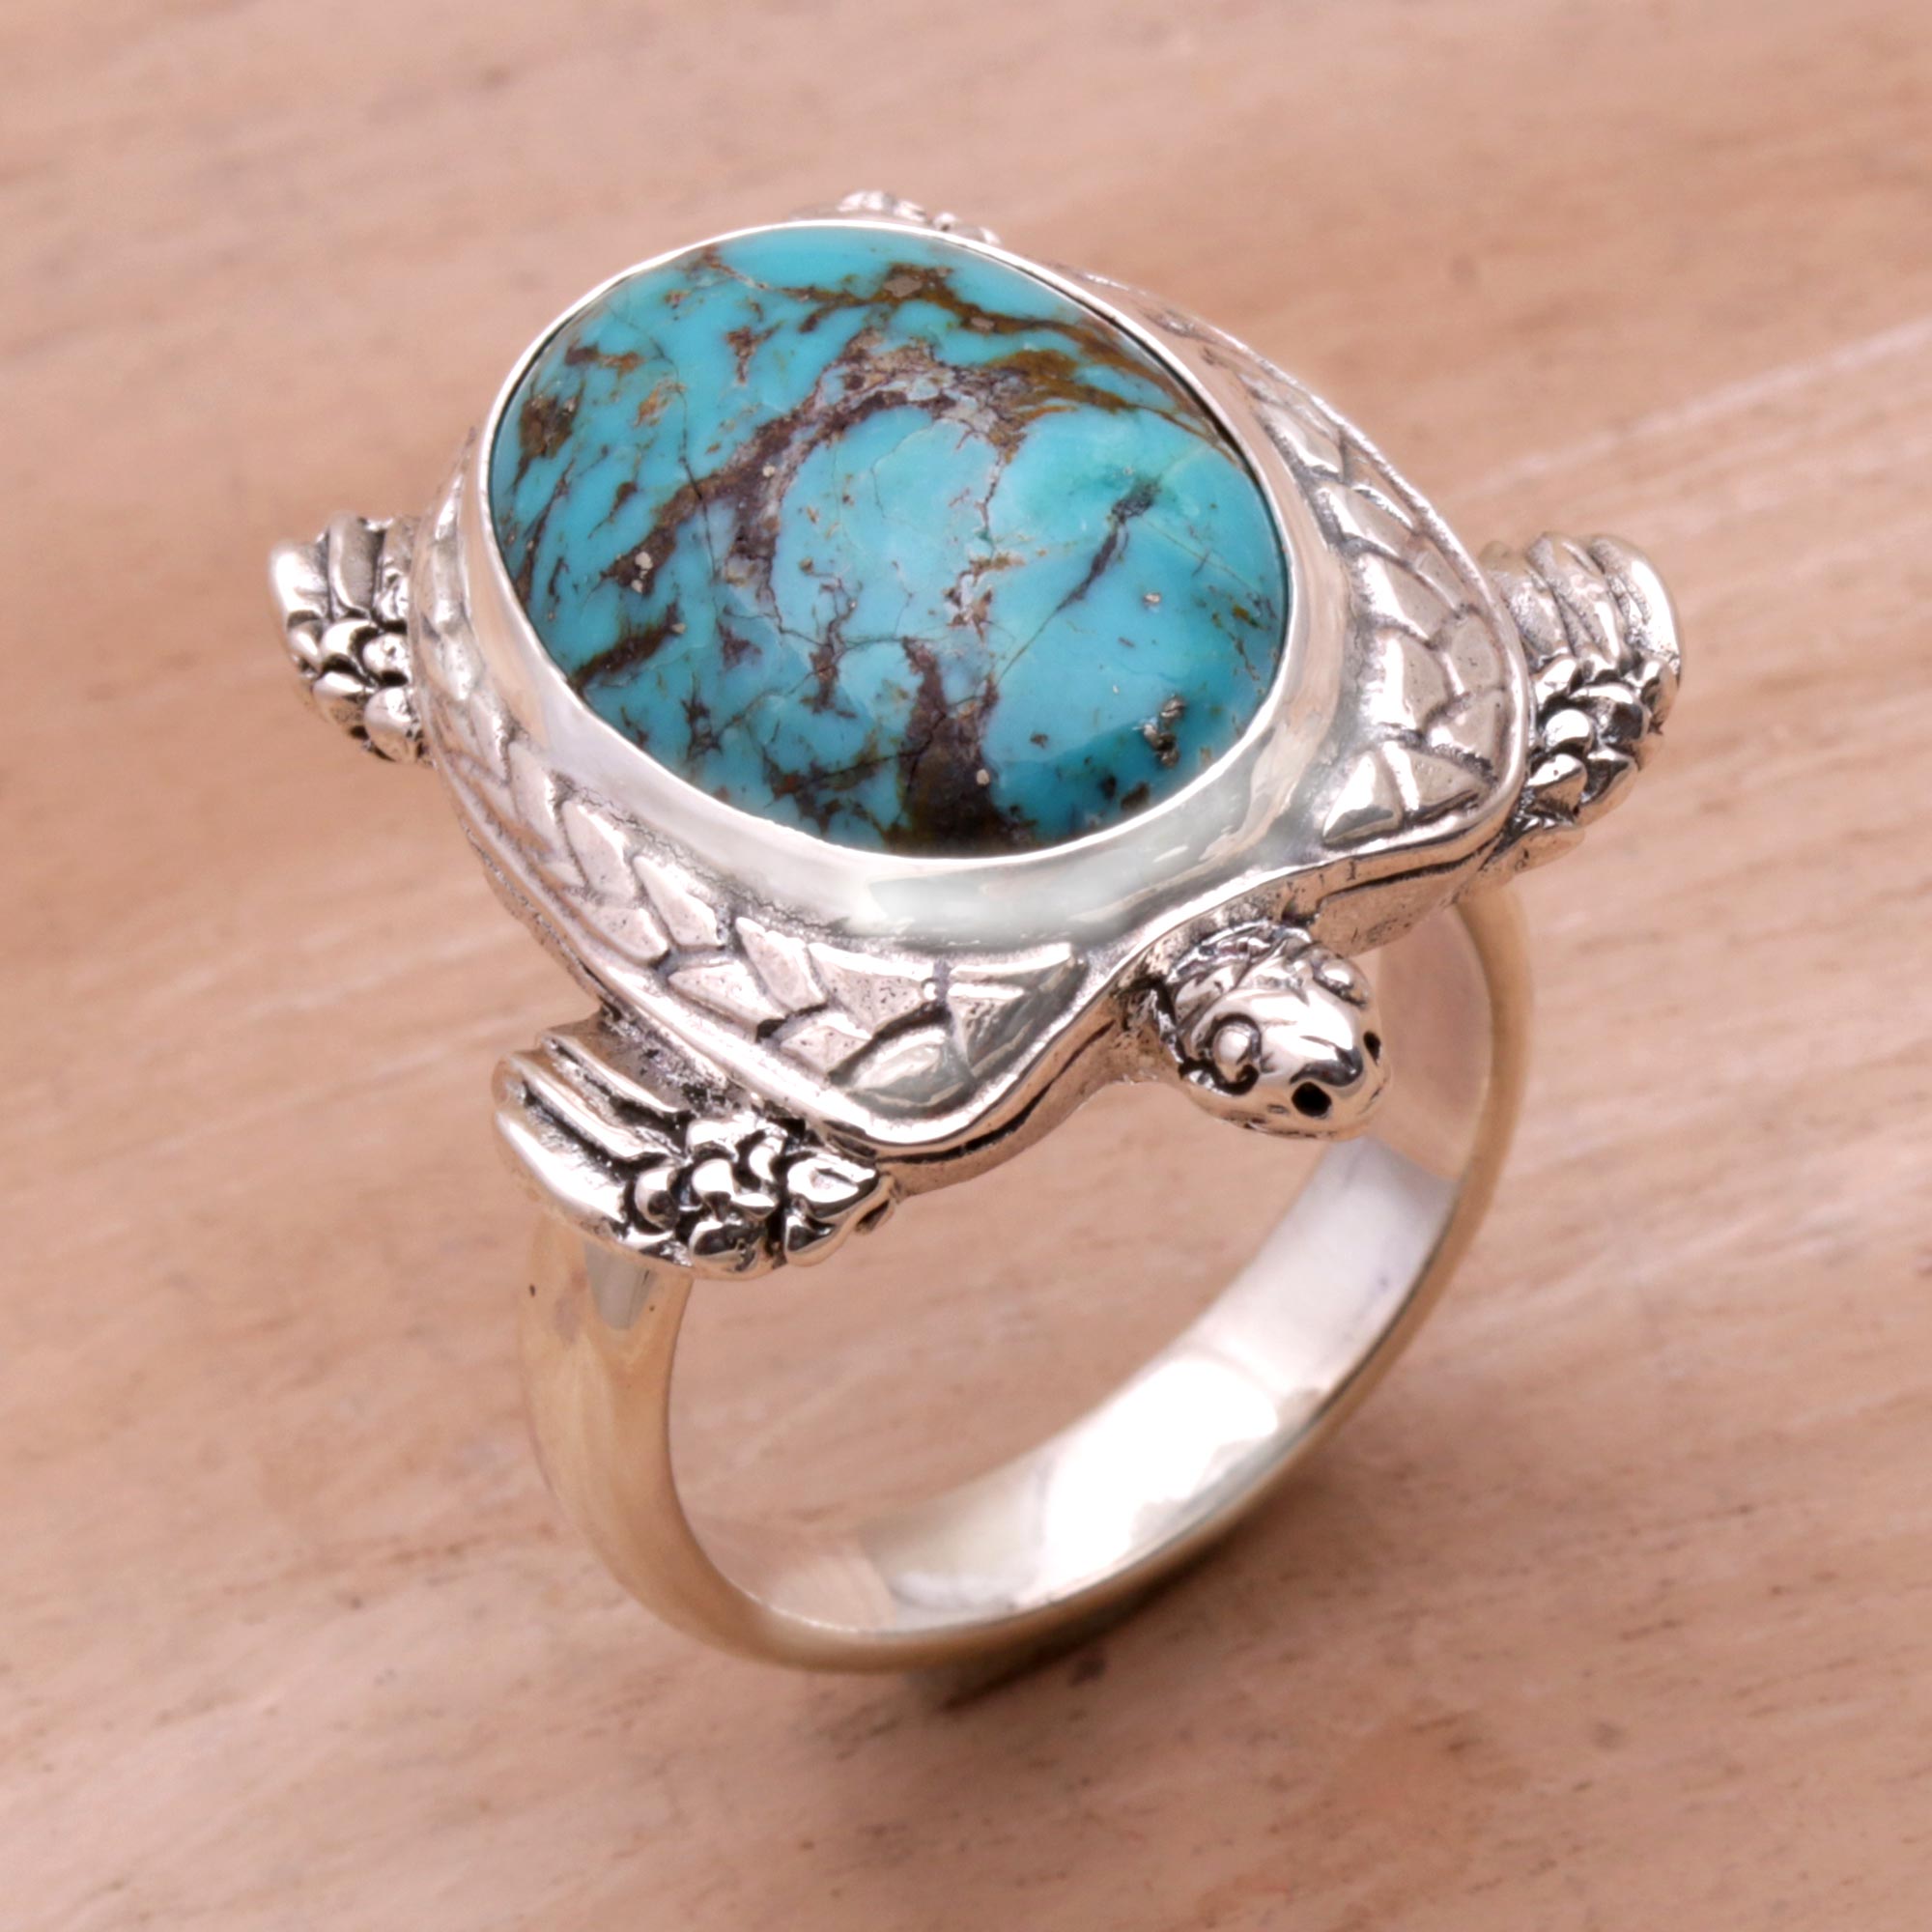 NOVICA Chelonia Turtle Men's Sterling Silver And Reconstituted Turquoise Ring - 9